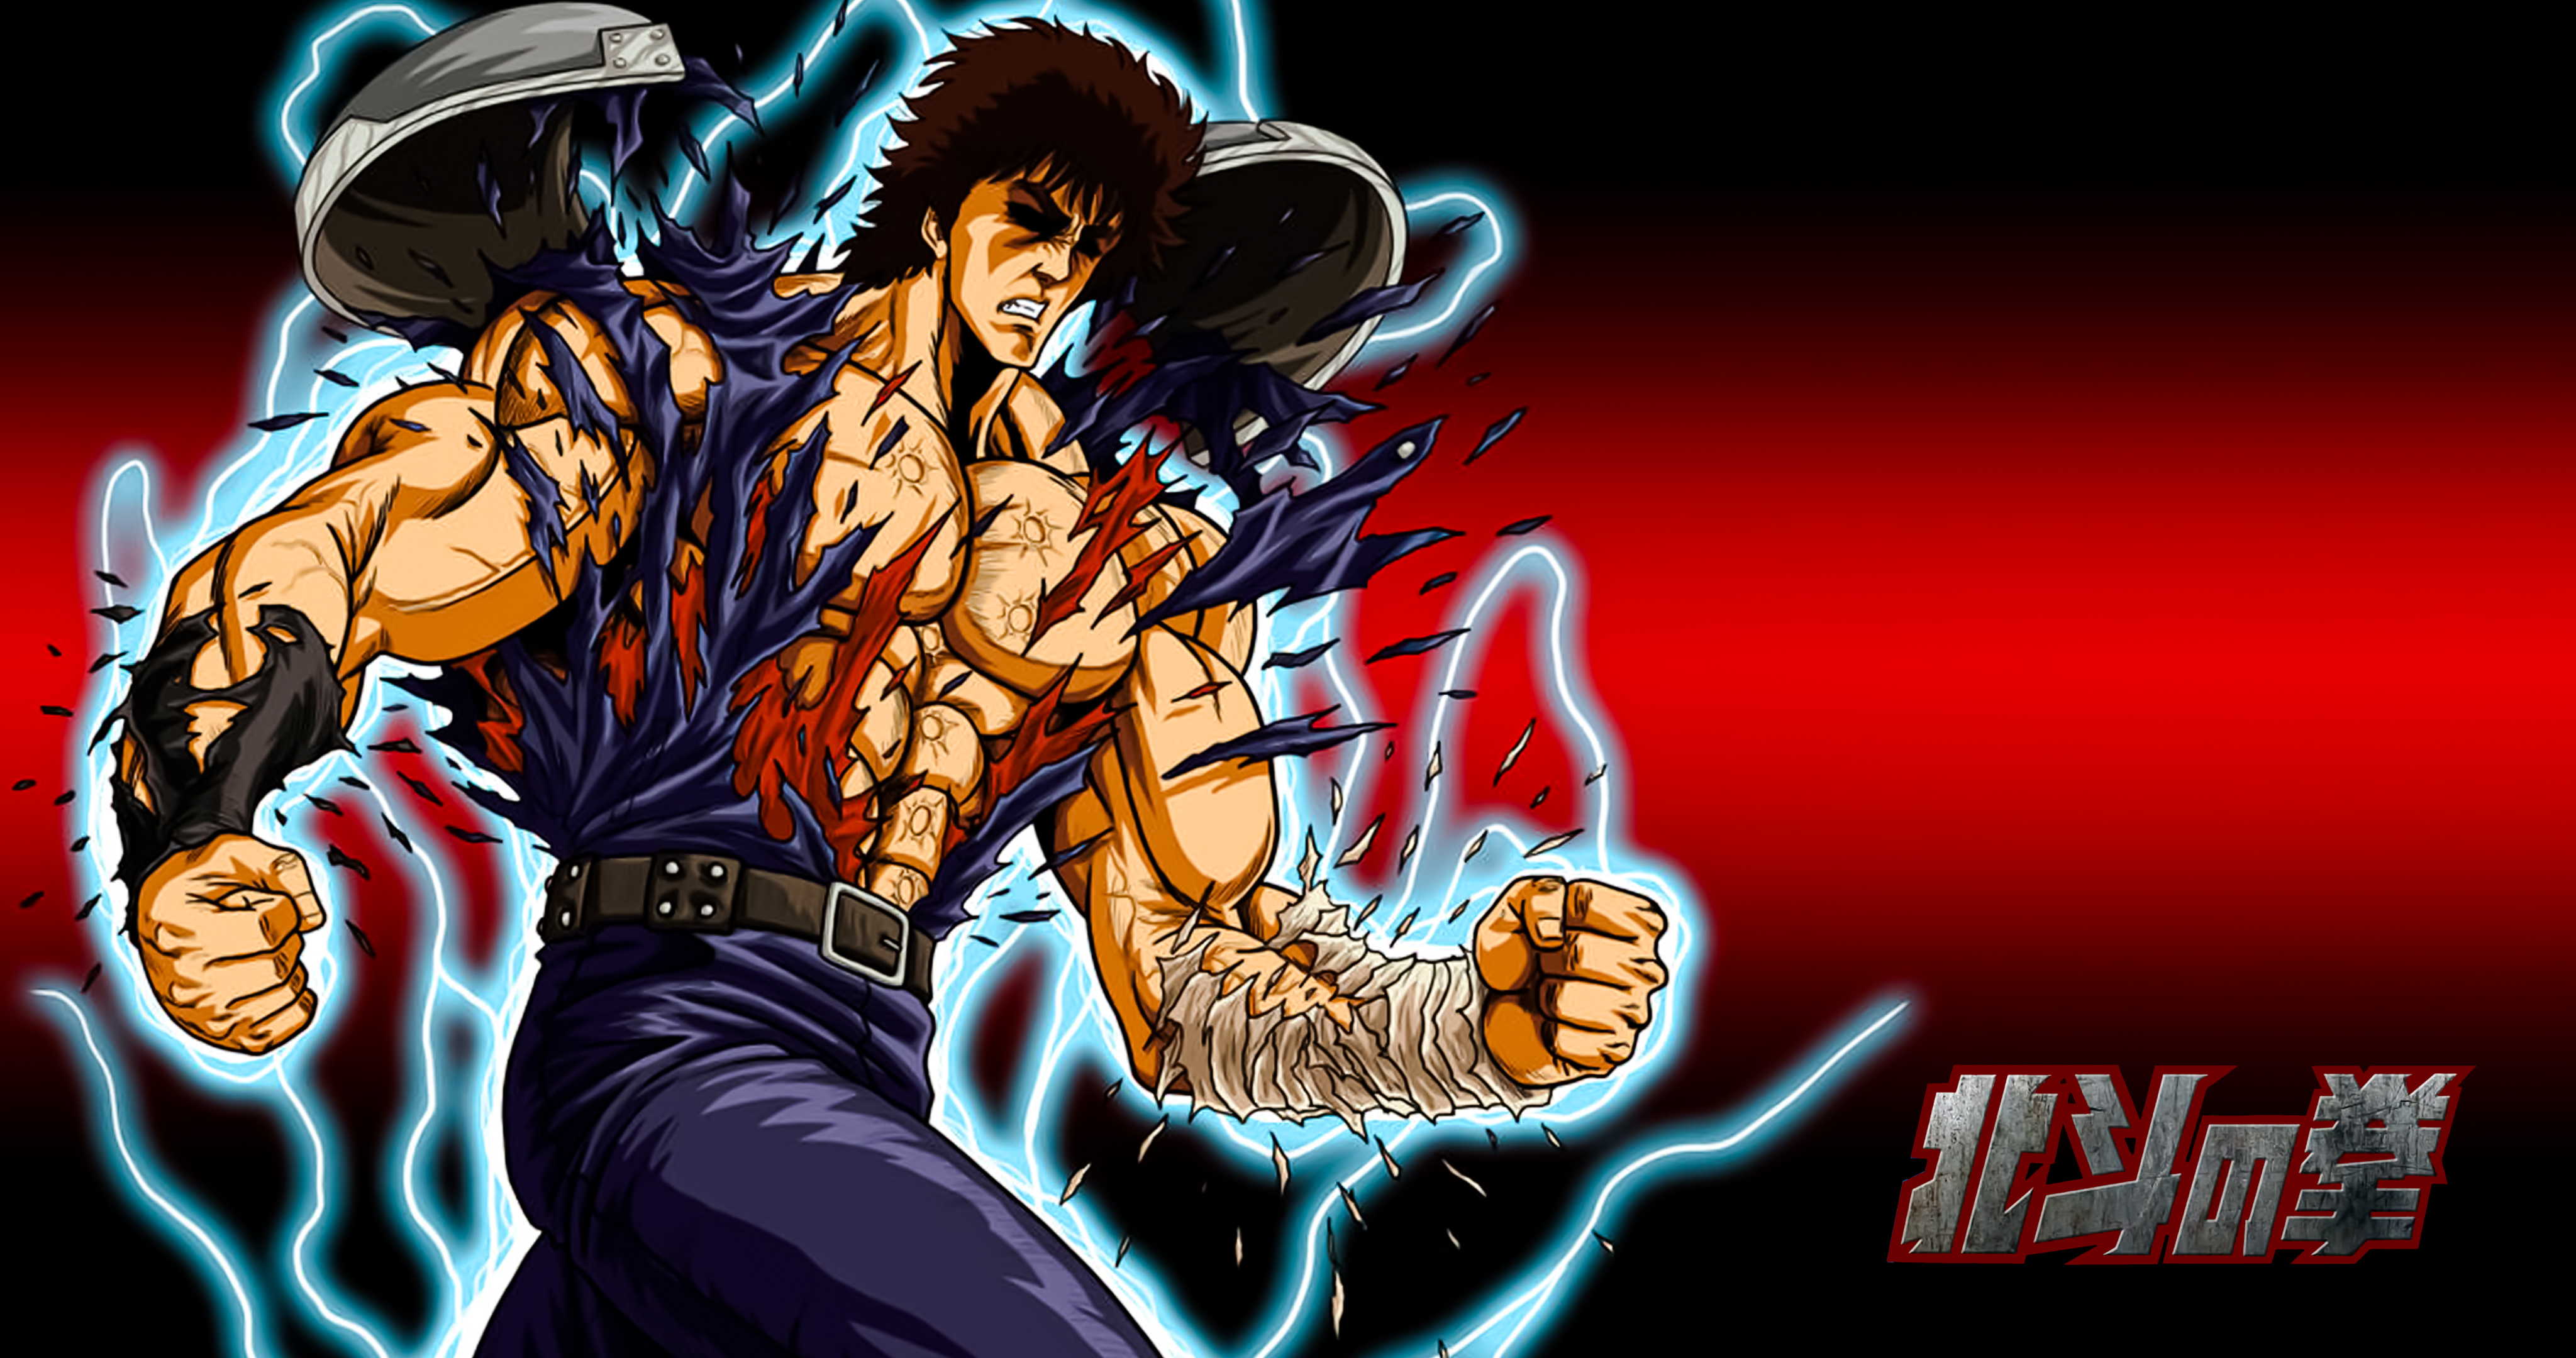 Anime 4096x2160 Fist Of The North Star Hokuto no Ken anime men Japanese characters Japanese